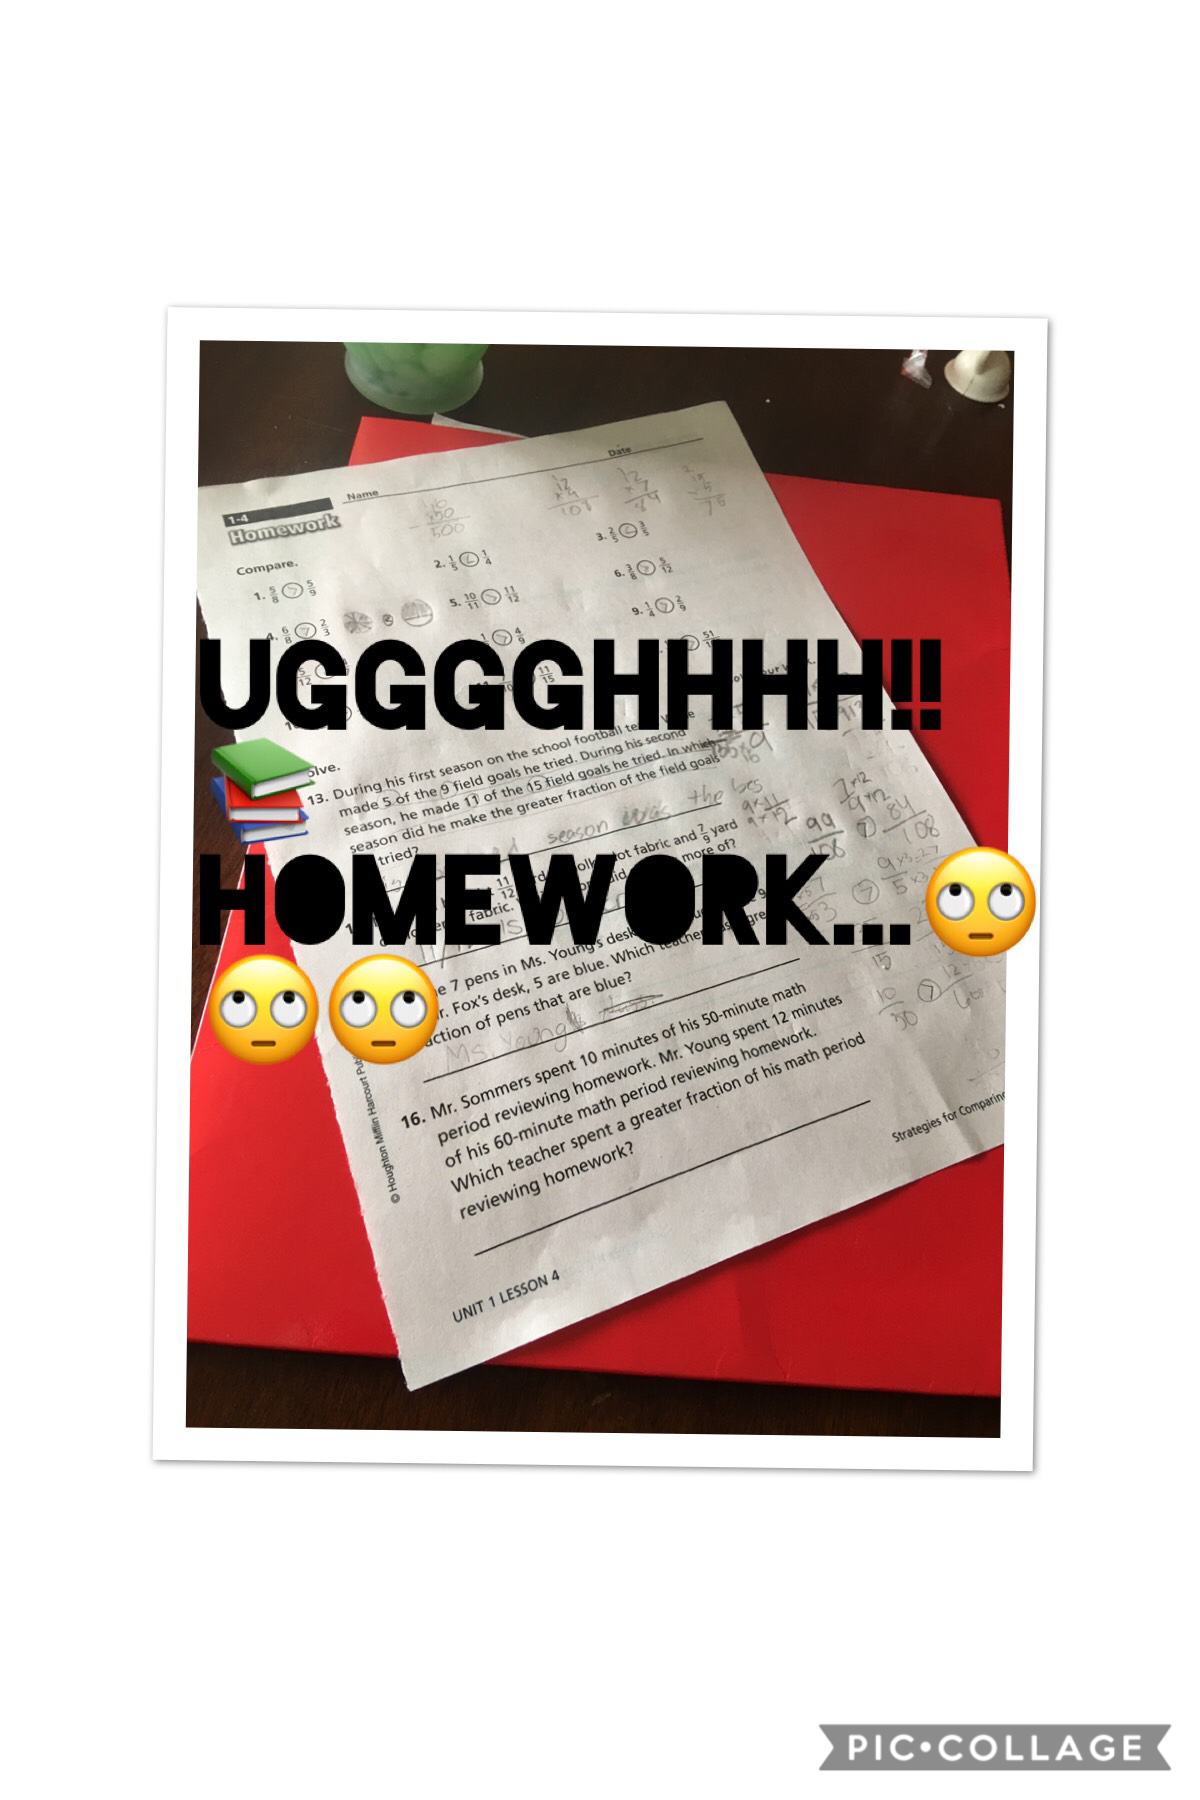 It’s Monday!! I hate Monday’s! Here is my “AWESOME” HOMEWORK 📚 !!!!